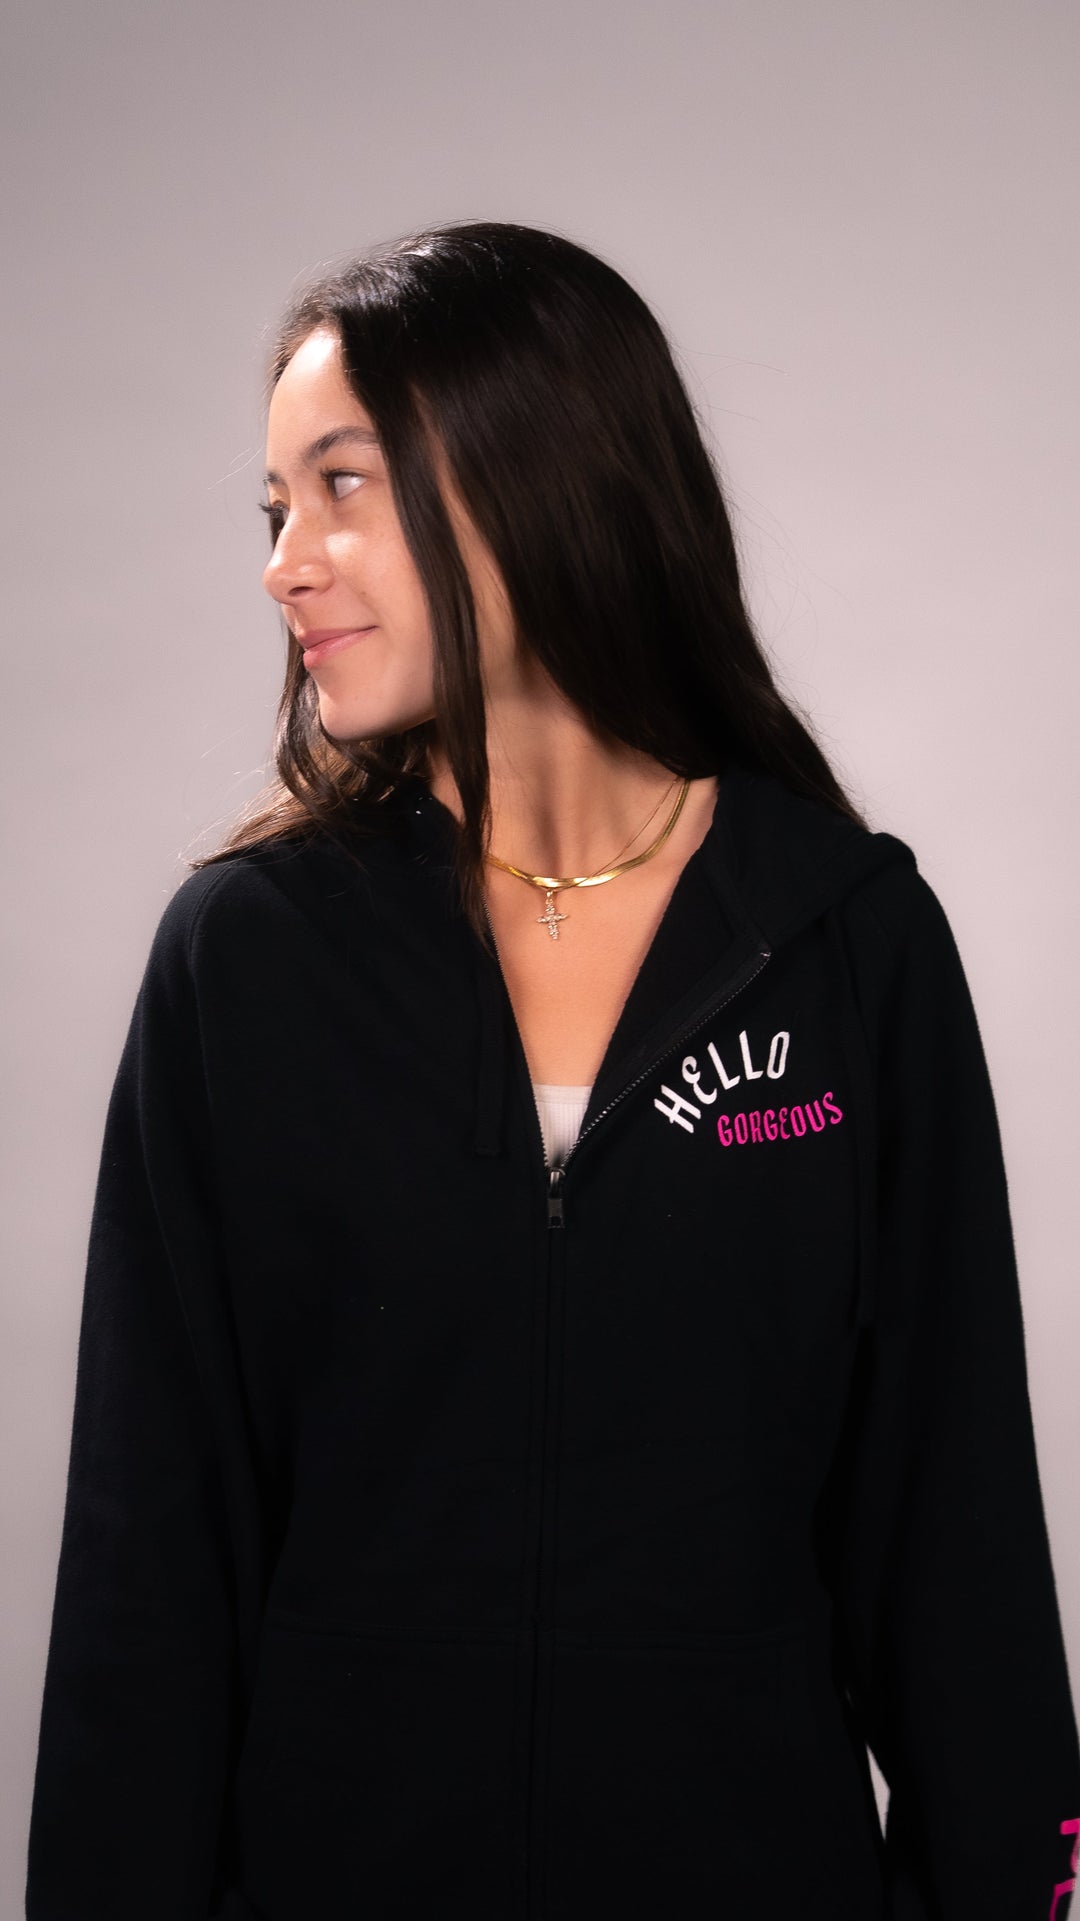 PLA Lash Sweater, Black Zip Up (front view of the sweater on a person, hello gorgeous design on left chest area and PLA logo on the bottom left sleeve)